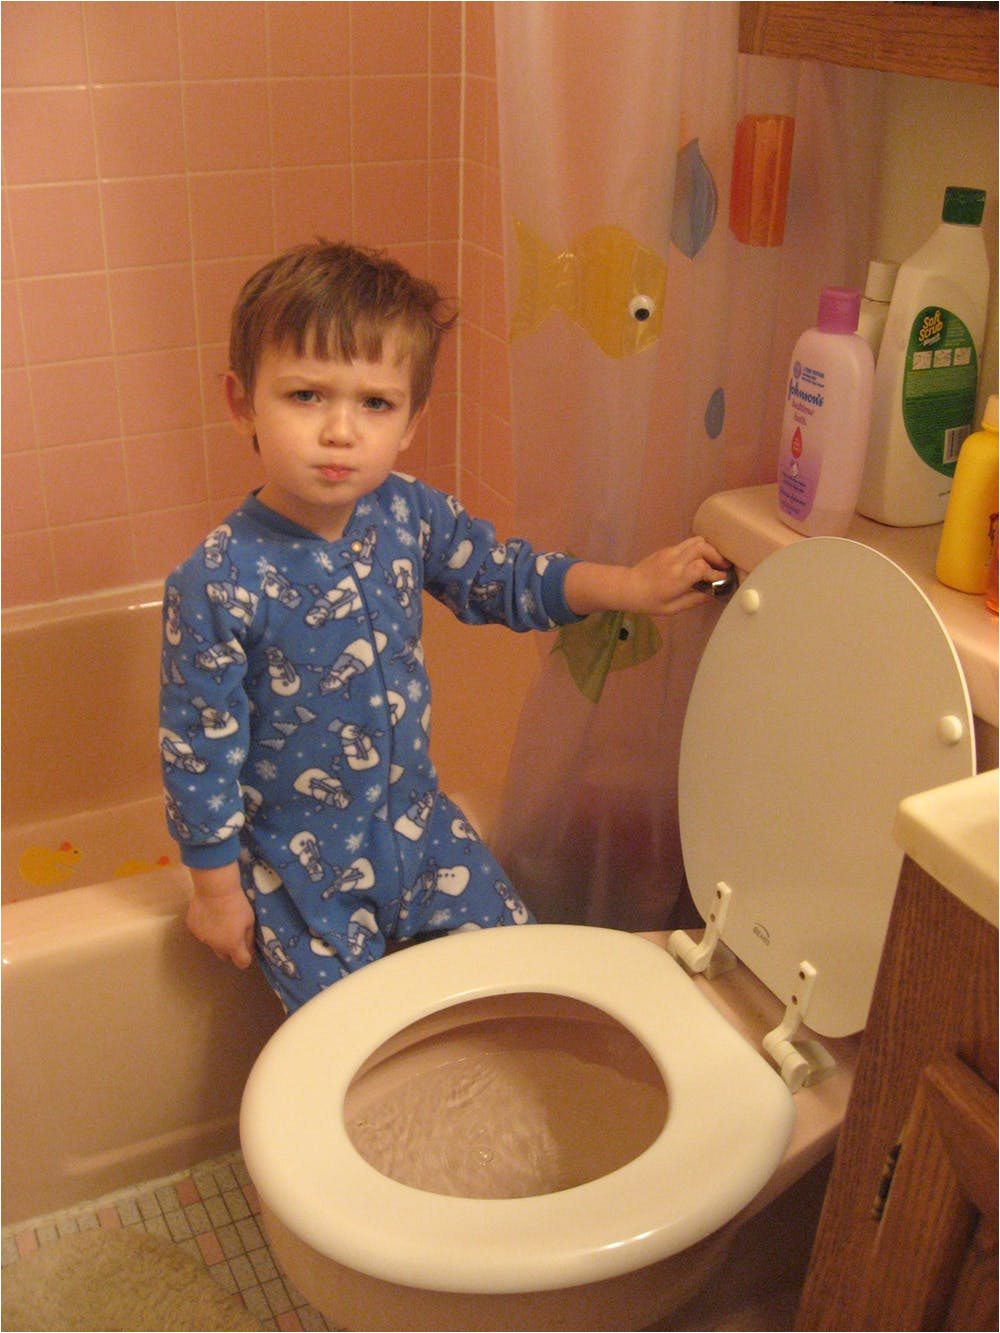 curious kids where does my poo go when i flush the toilet does it go into the ocean